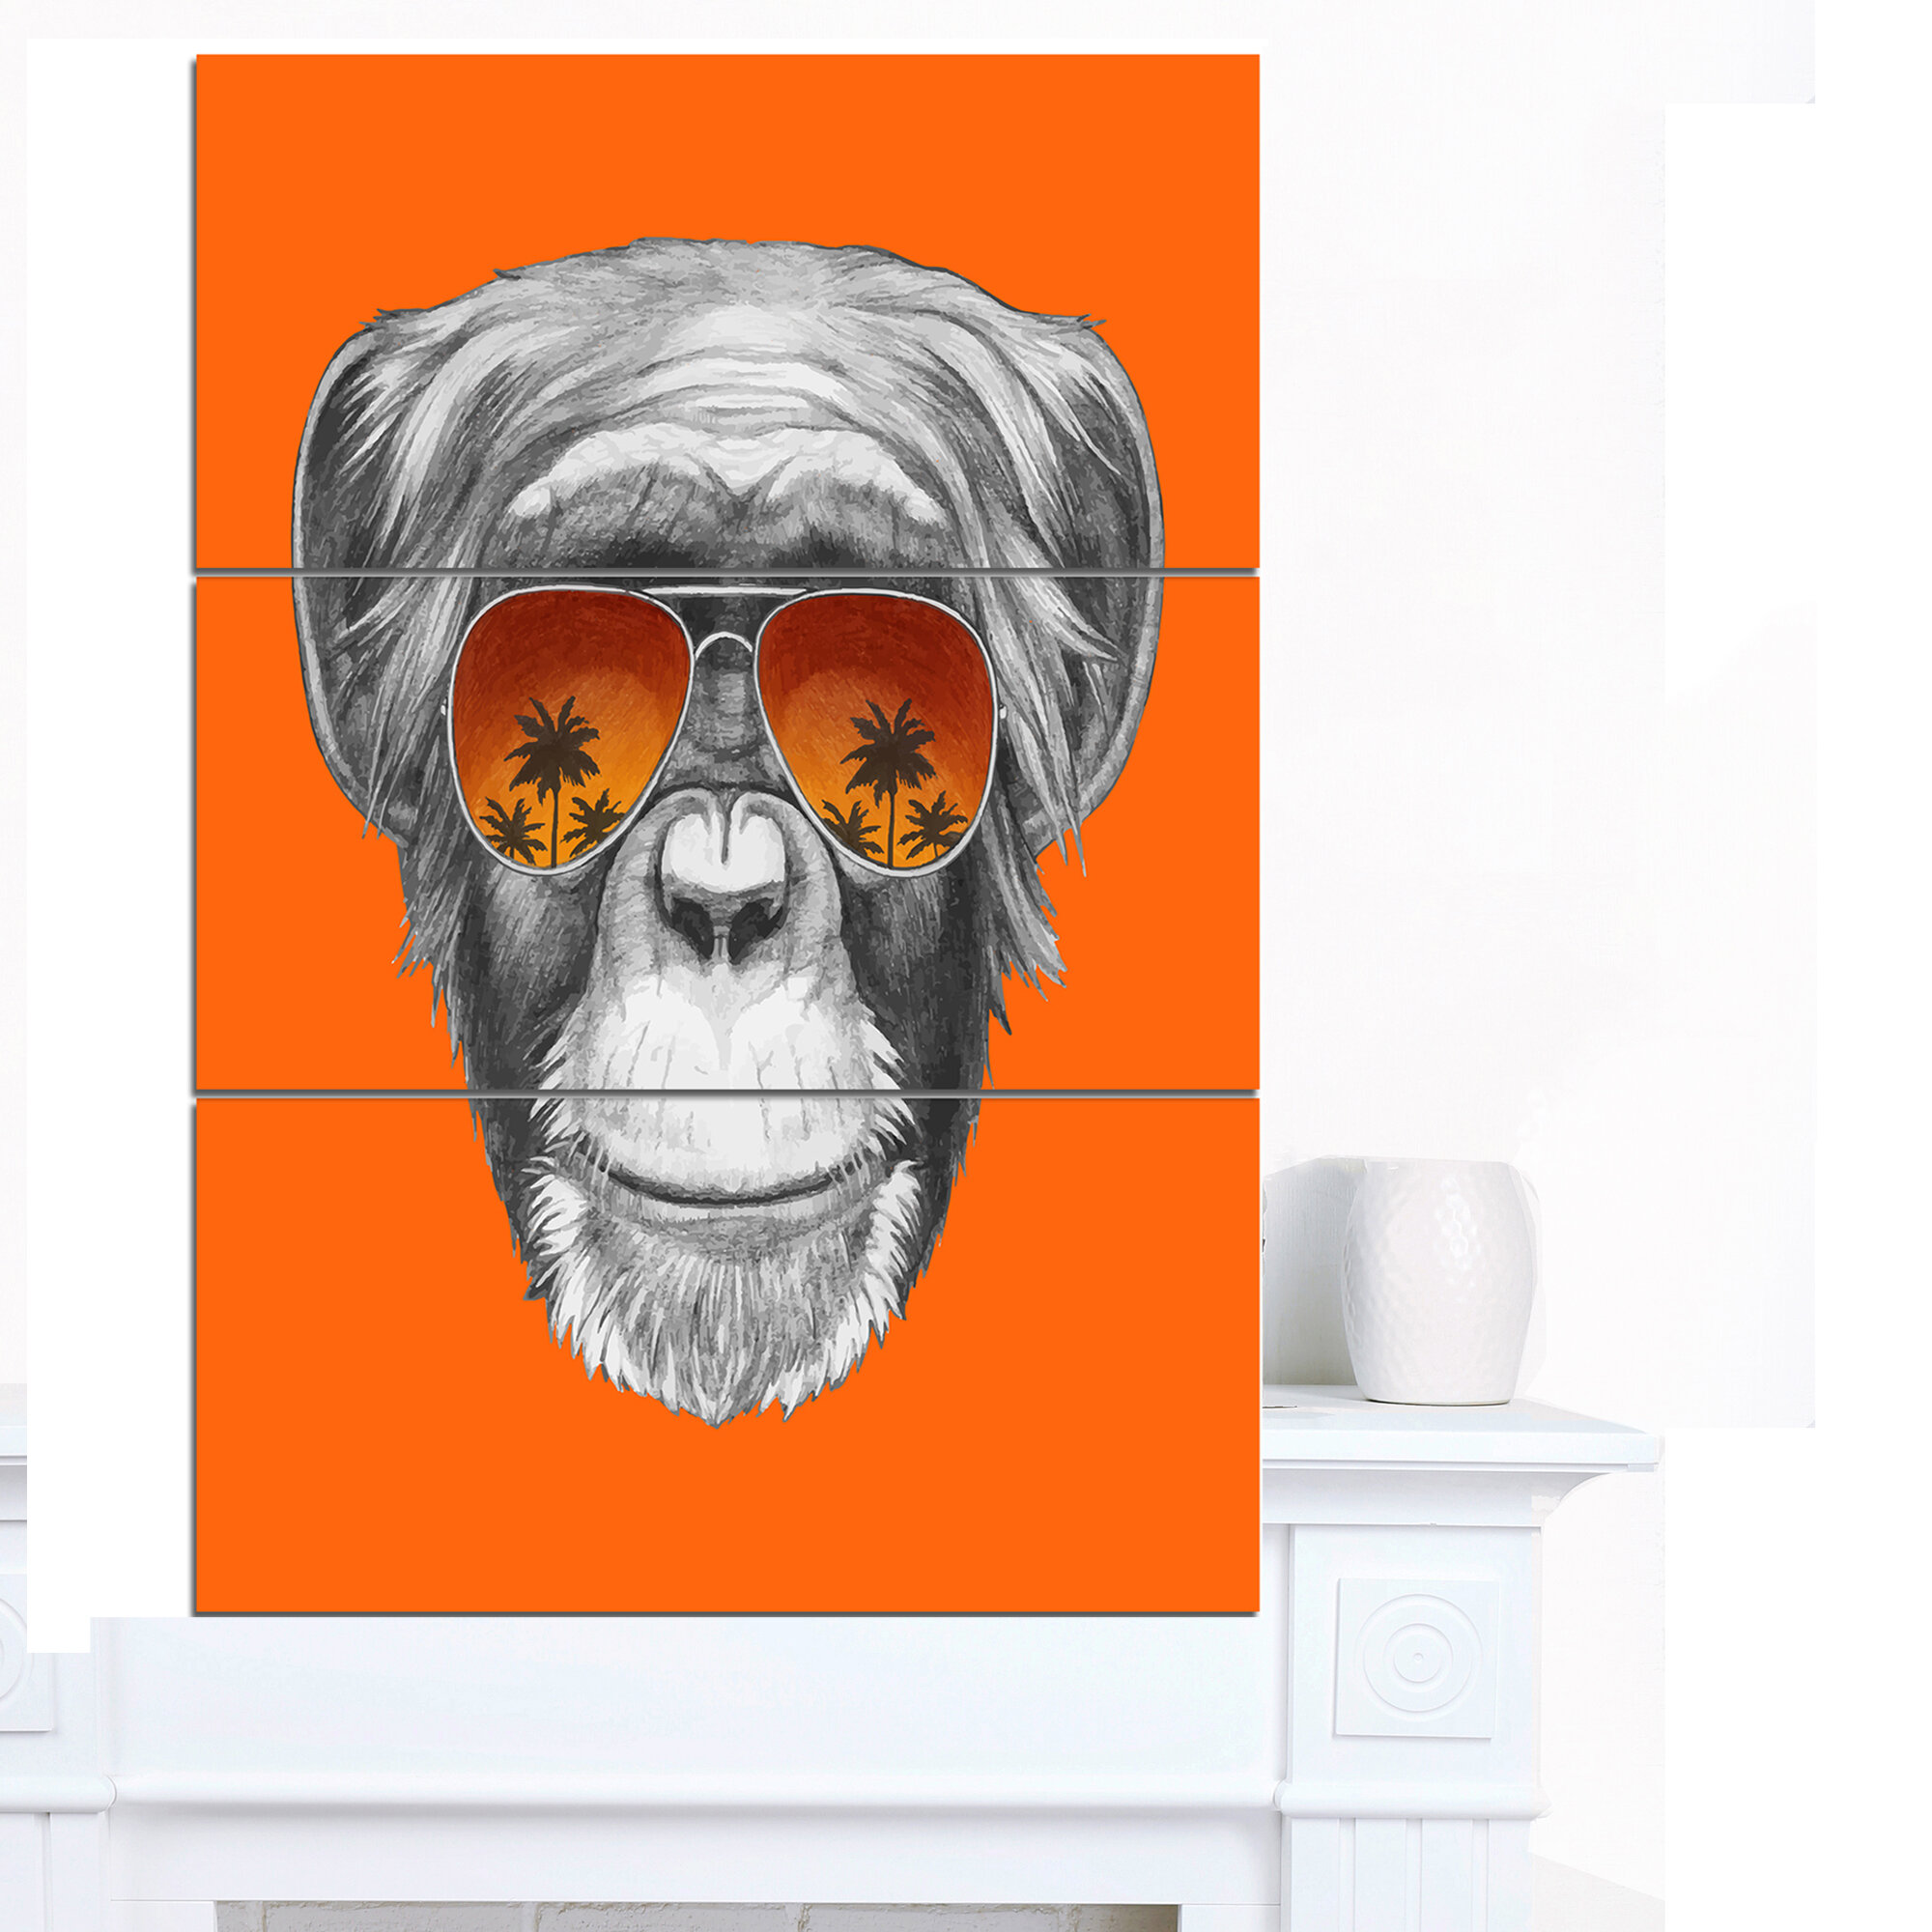 Monkey With Mirror Sunglasses - 3 Piece Wrapped Canvas Graphic Art